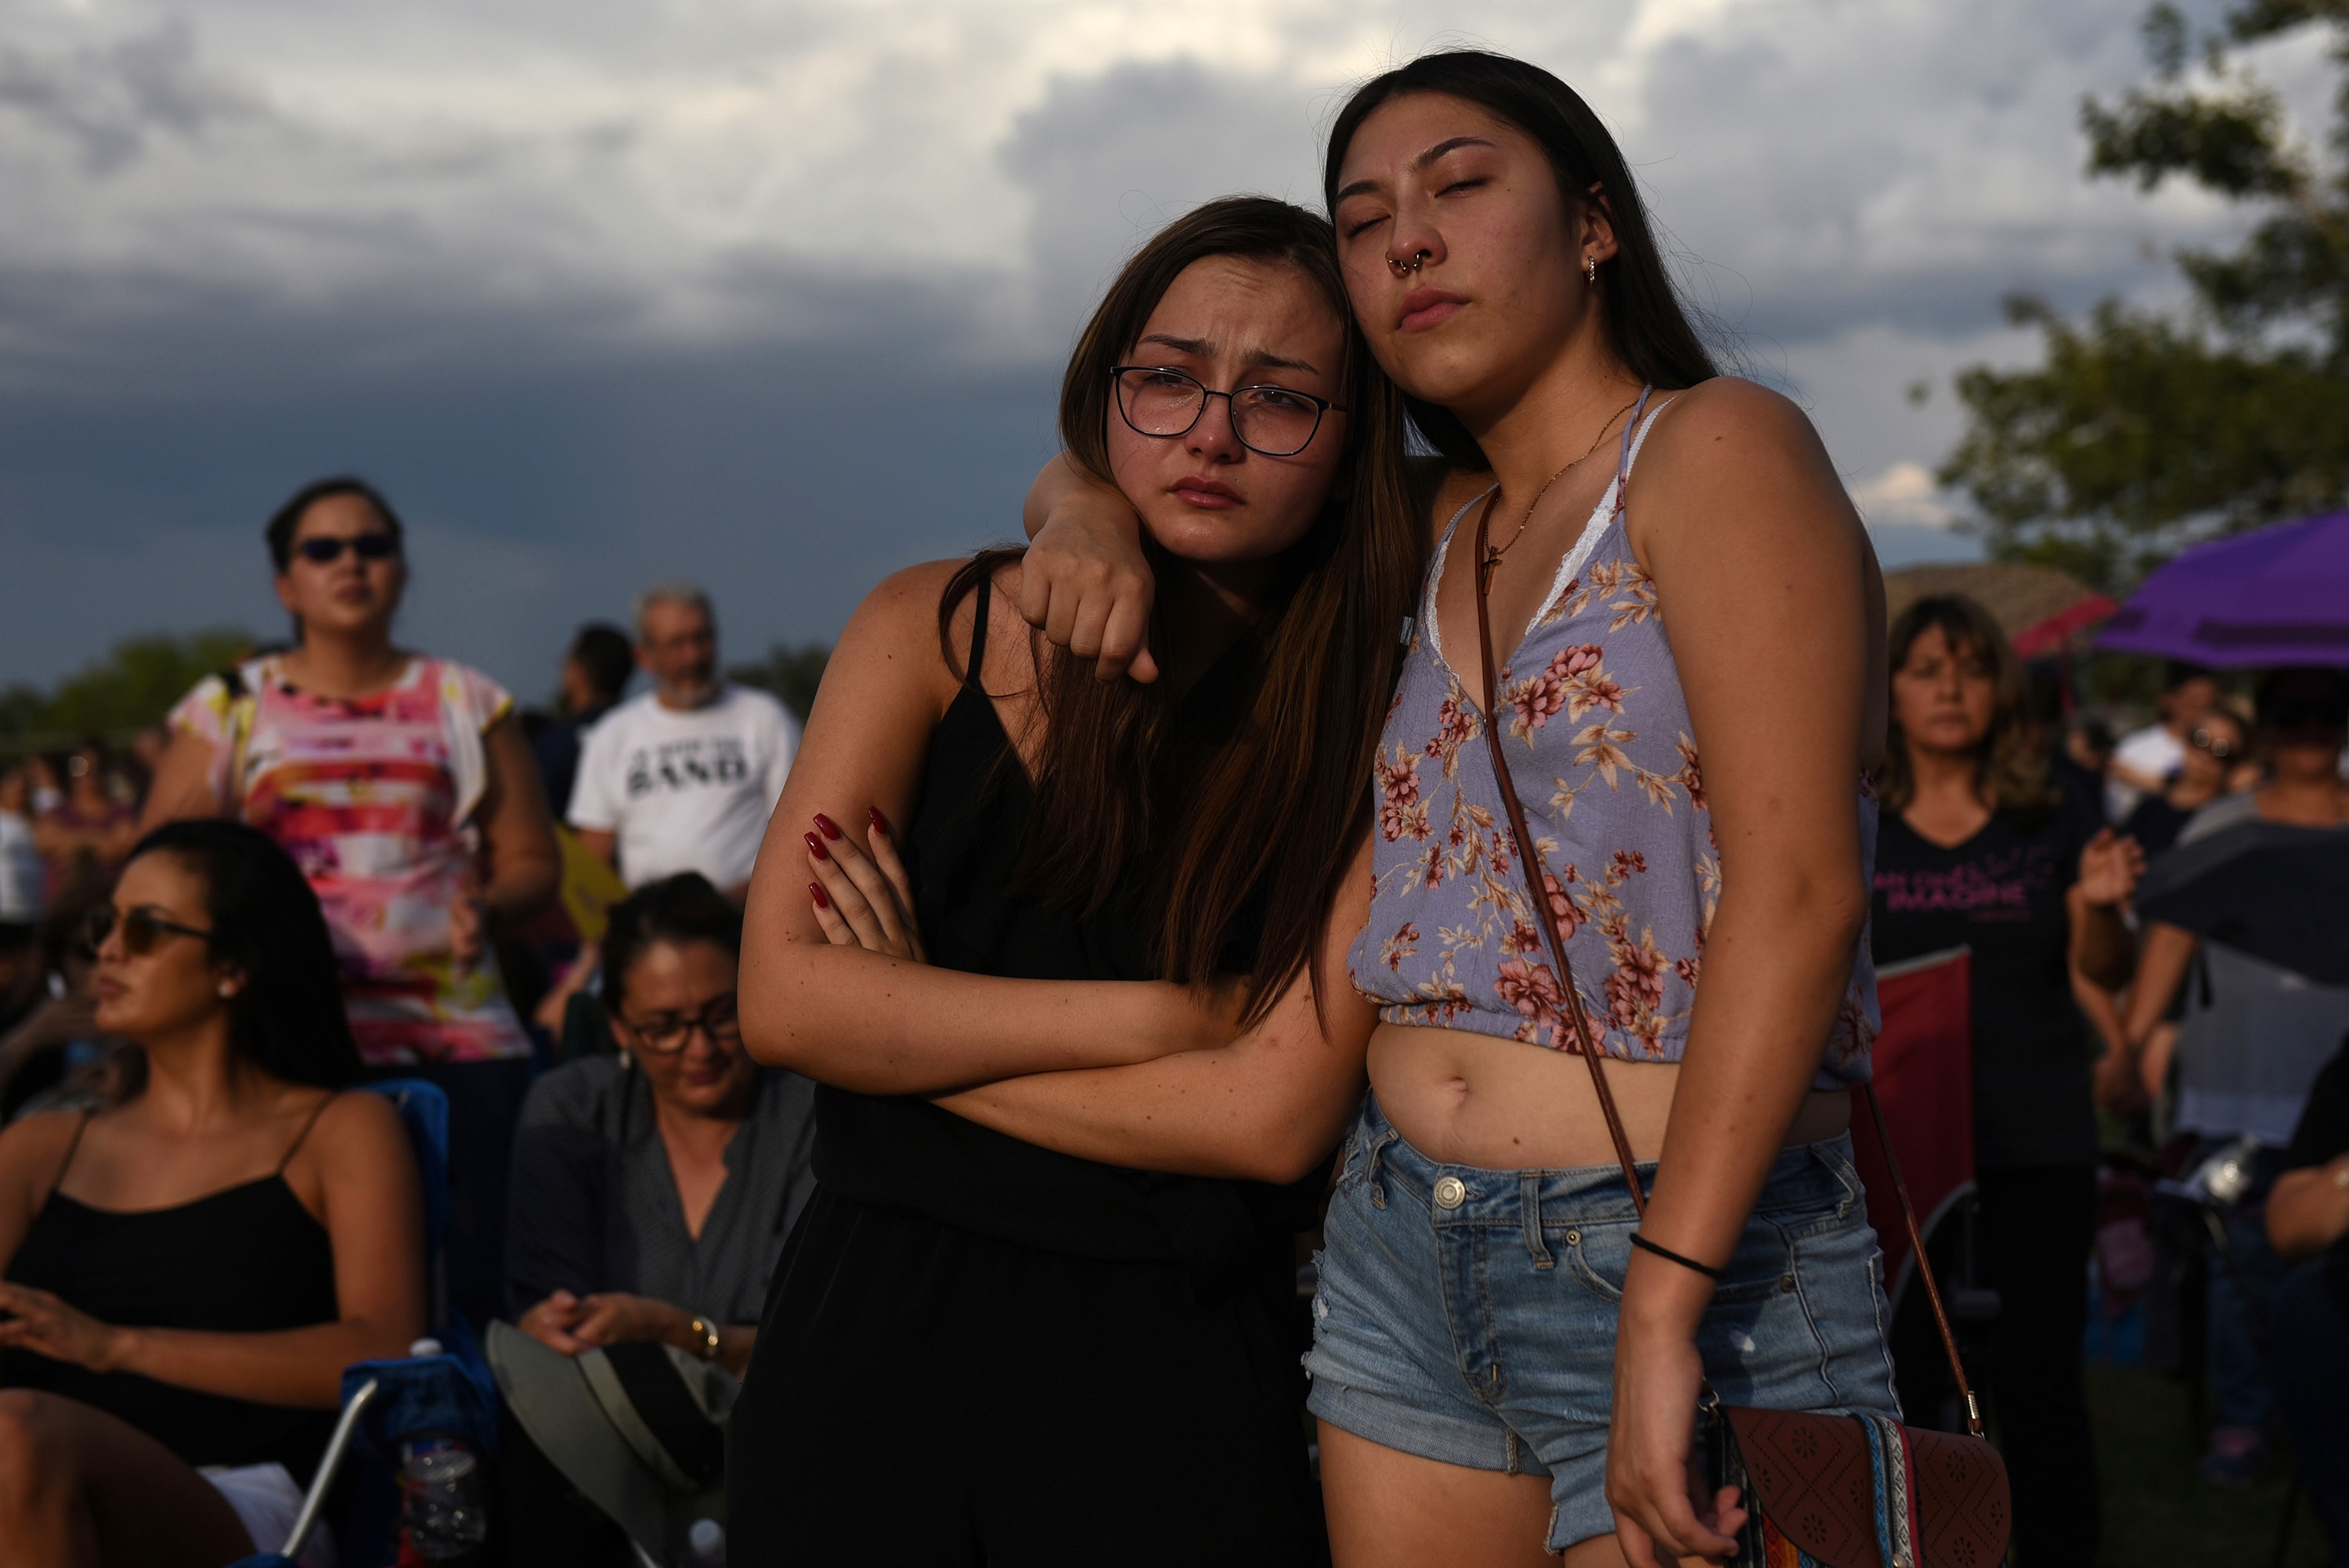 Amber Ruiz and Jazmyn Blake embrace during a vigil a day after a mass shooting at a Walmart store in El Paso, Texas, on Aug. 4. Photo by Callaghan O'Hare, Reuters.